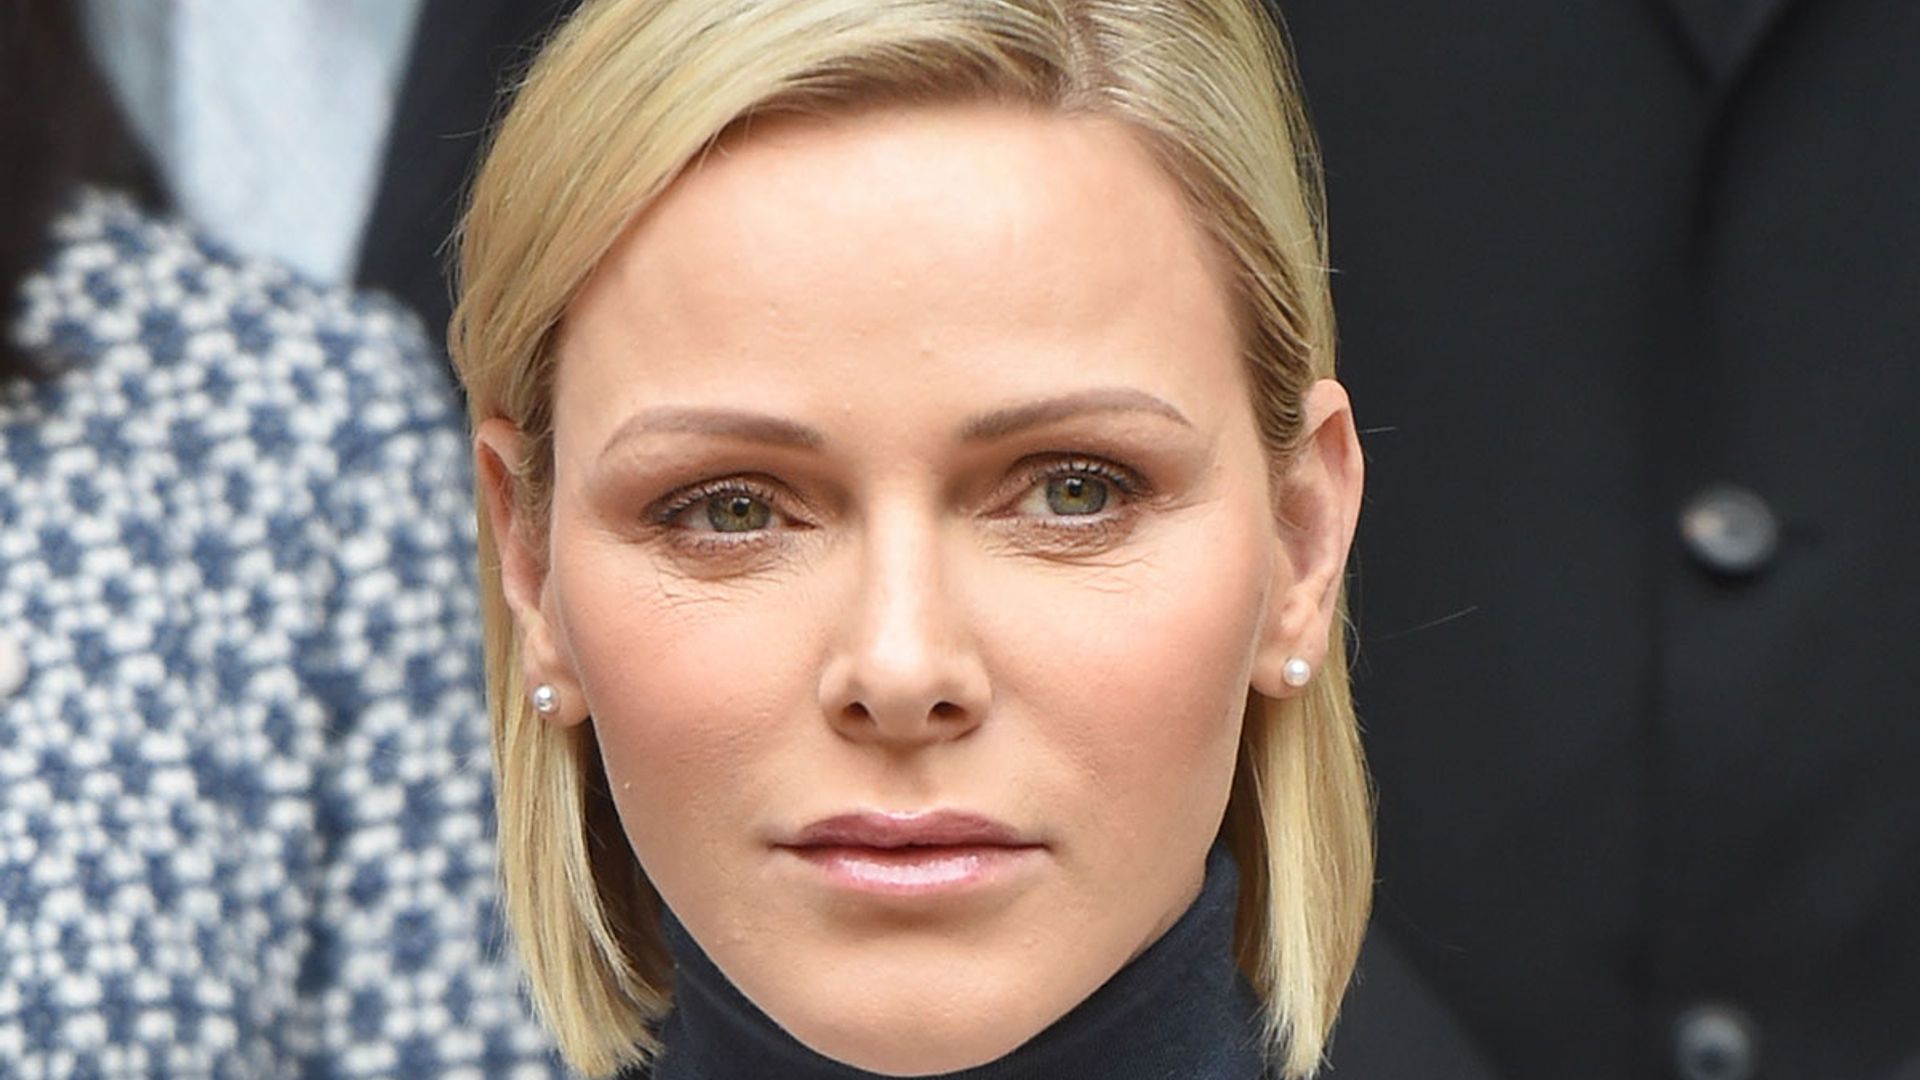 How long is Princess Charlene expected to stay at treatment facility?